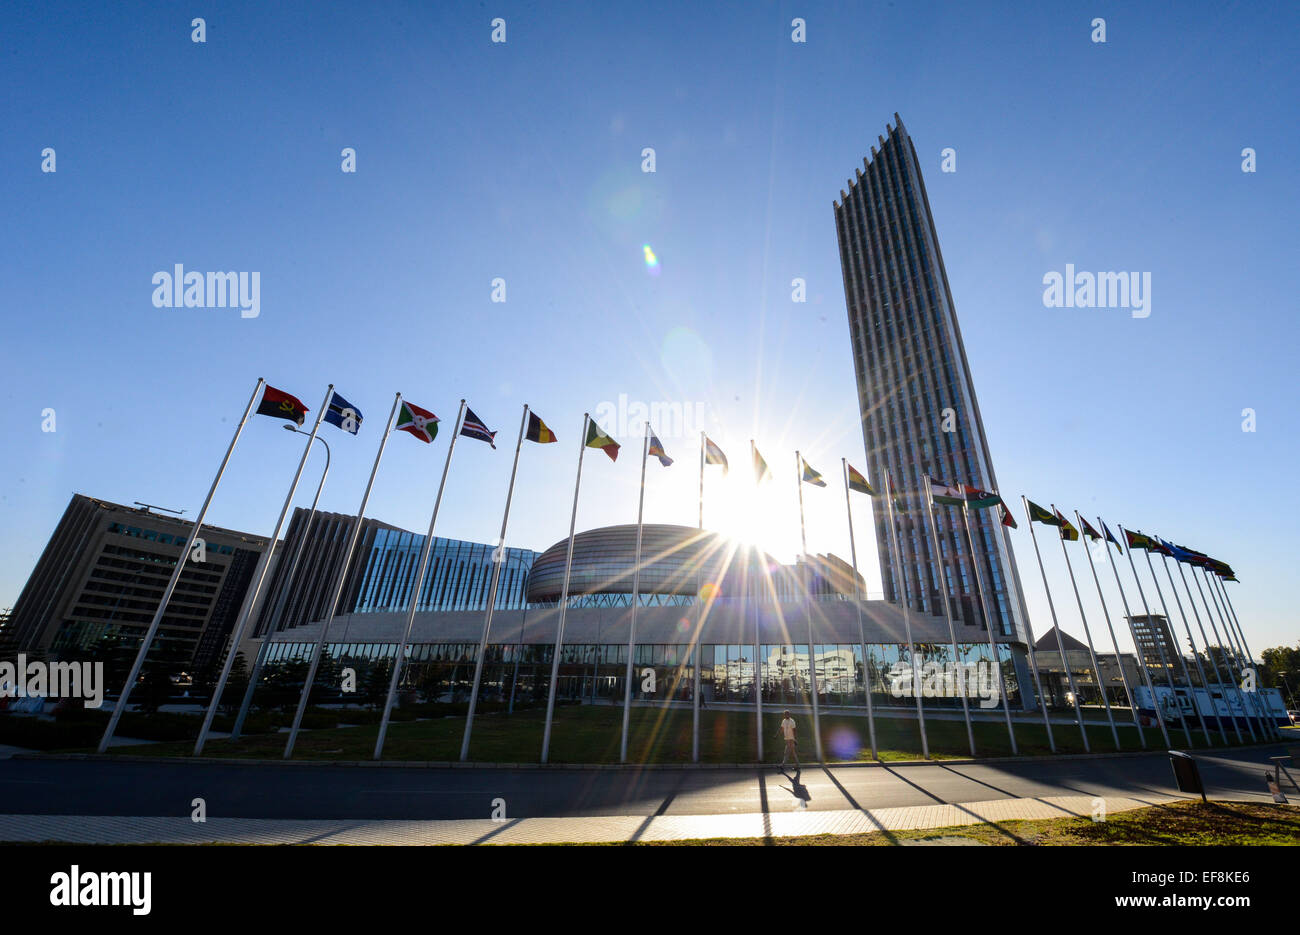 Addis Ababa, Jan. 28. 30th Jan, 2015. A man walks pass the flagpoles outside the African Union (AU) Headquarters in Addis Ababa, capital of Ethiopia, on Jan. 28, 2014. The 24th AU Summit is scheduled to open here on Jan. 30, 2015. © Zhai Jianlan/Xinhua/Alamy Live News Stock Photo